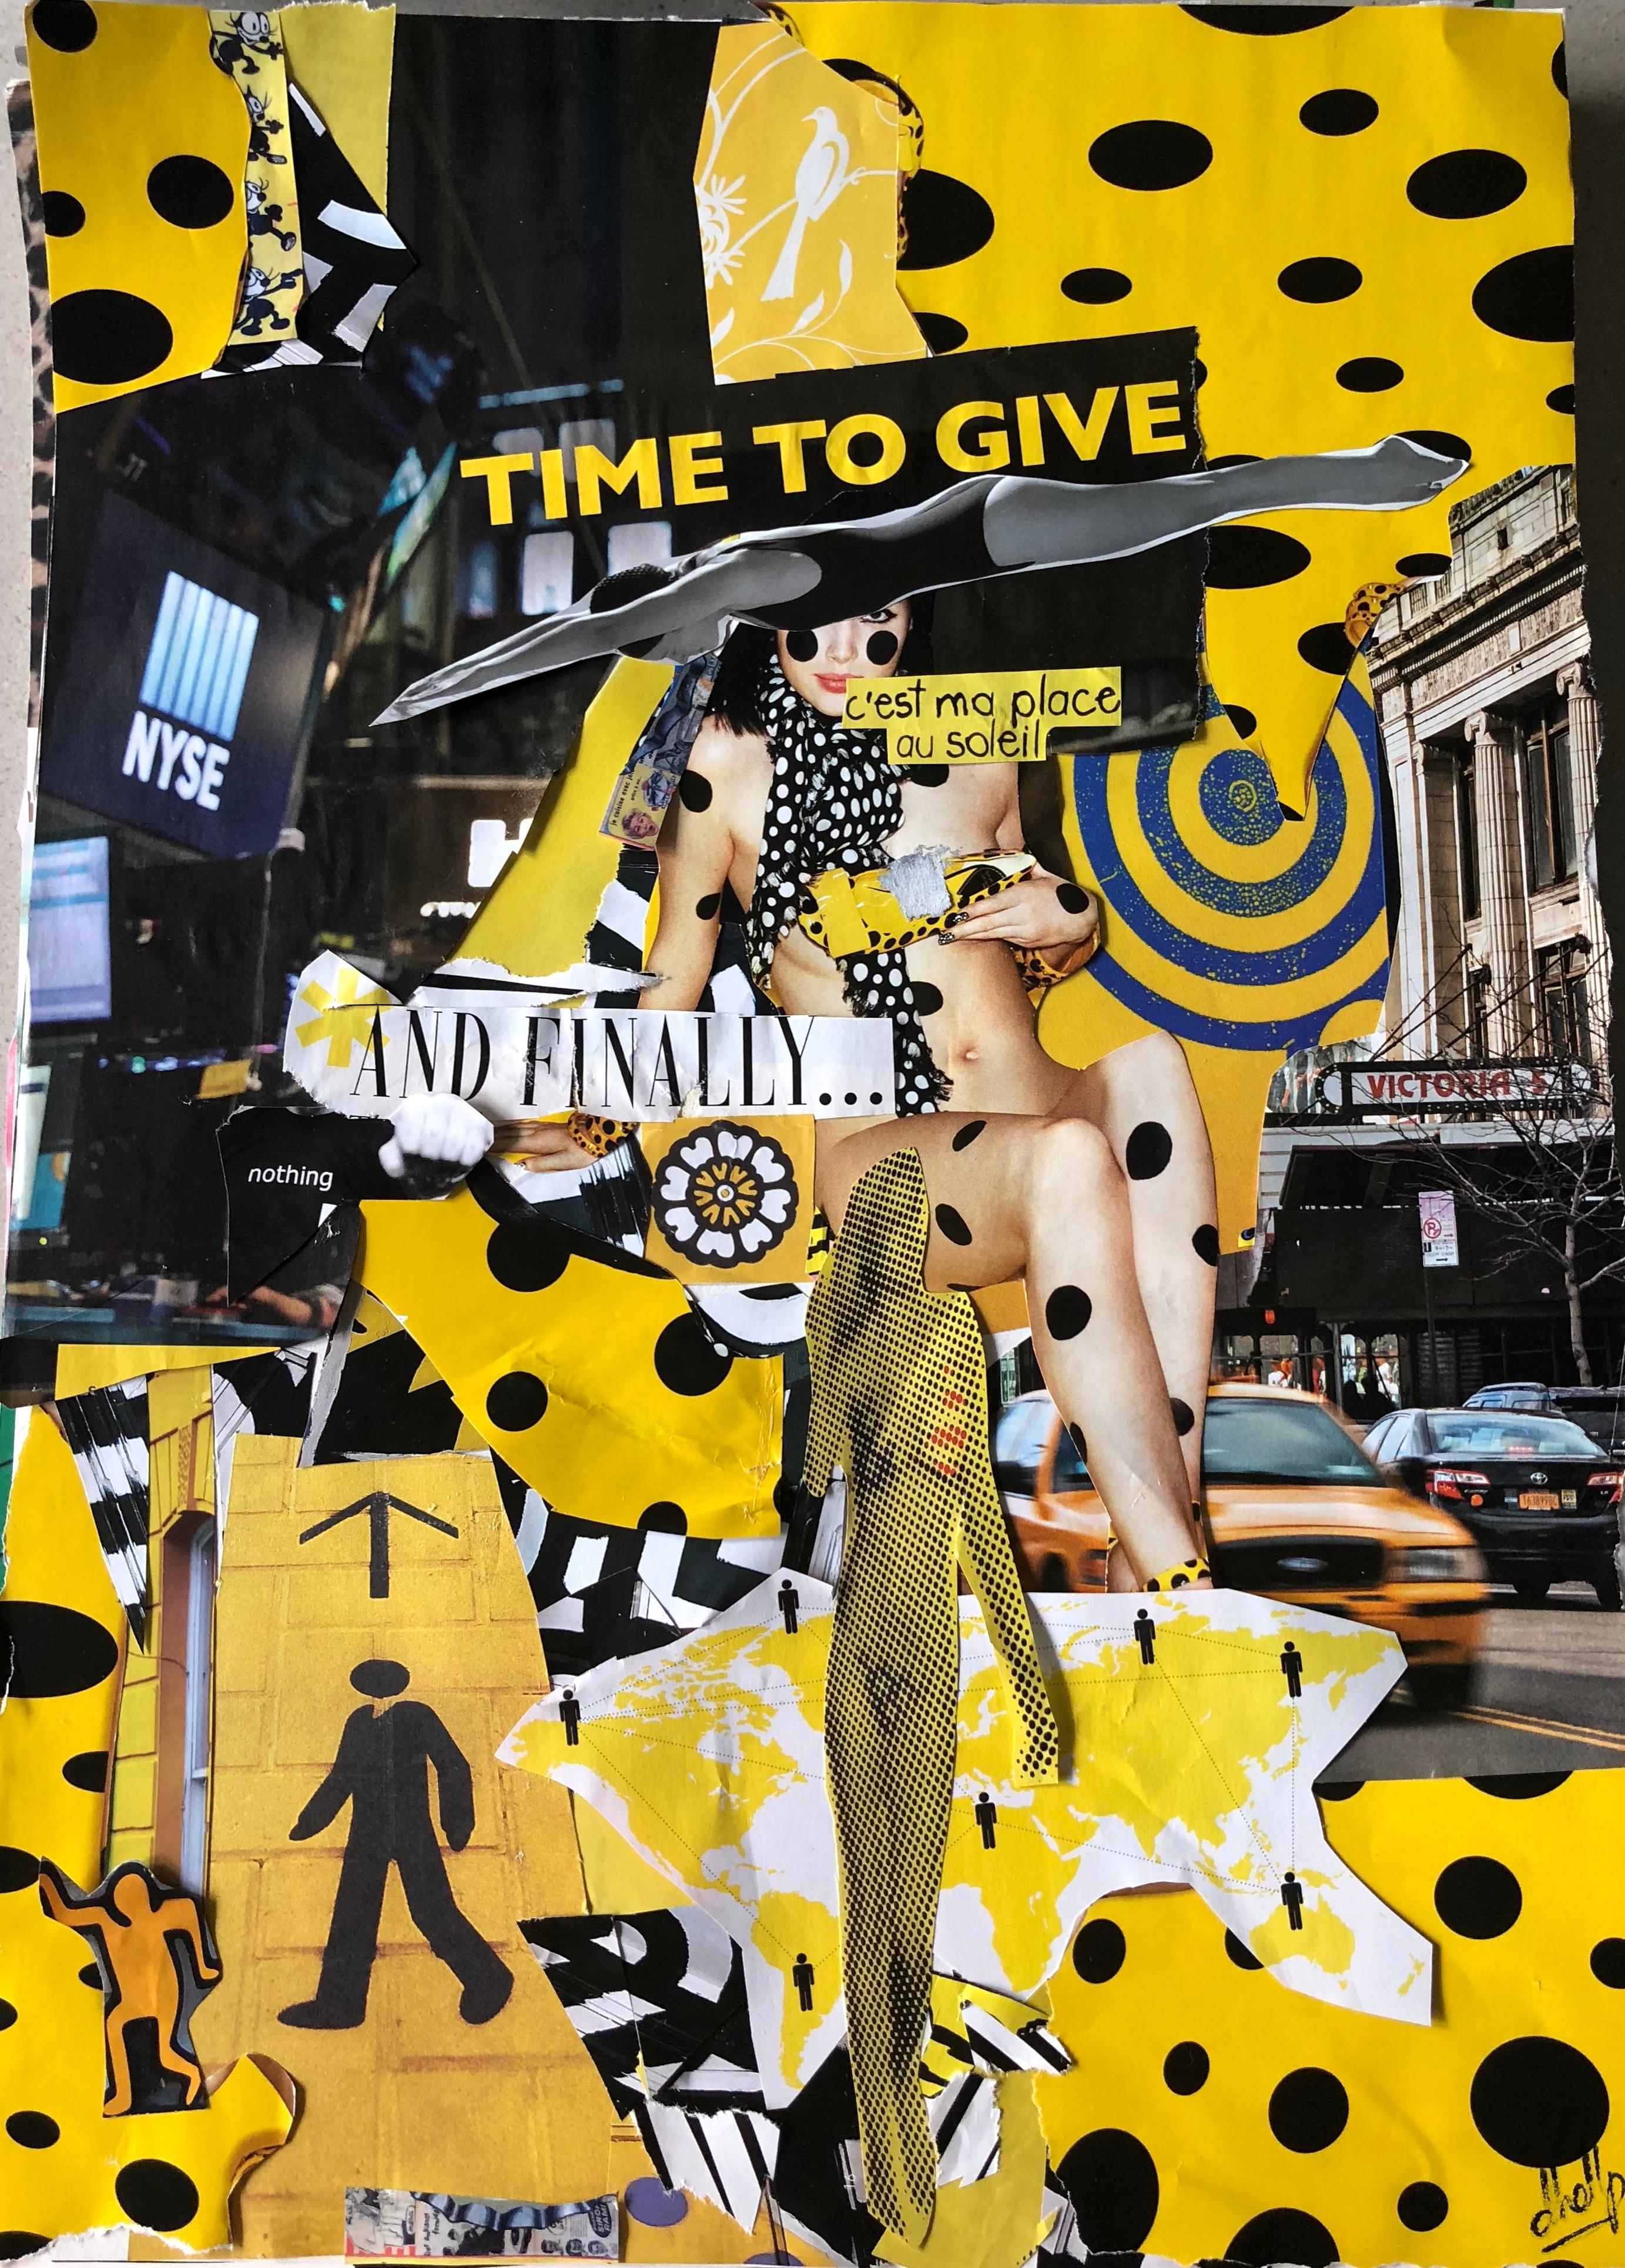 Time to give ... nothing - Mixed Media Art by DHDLP